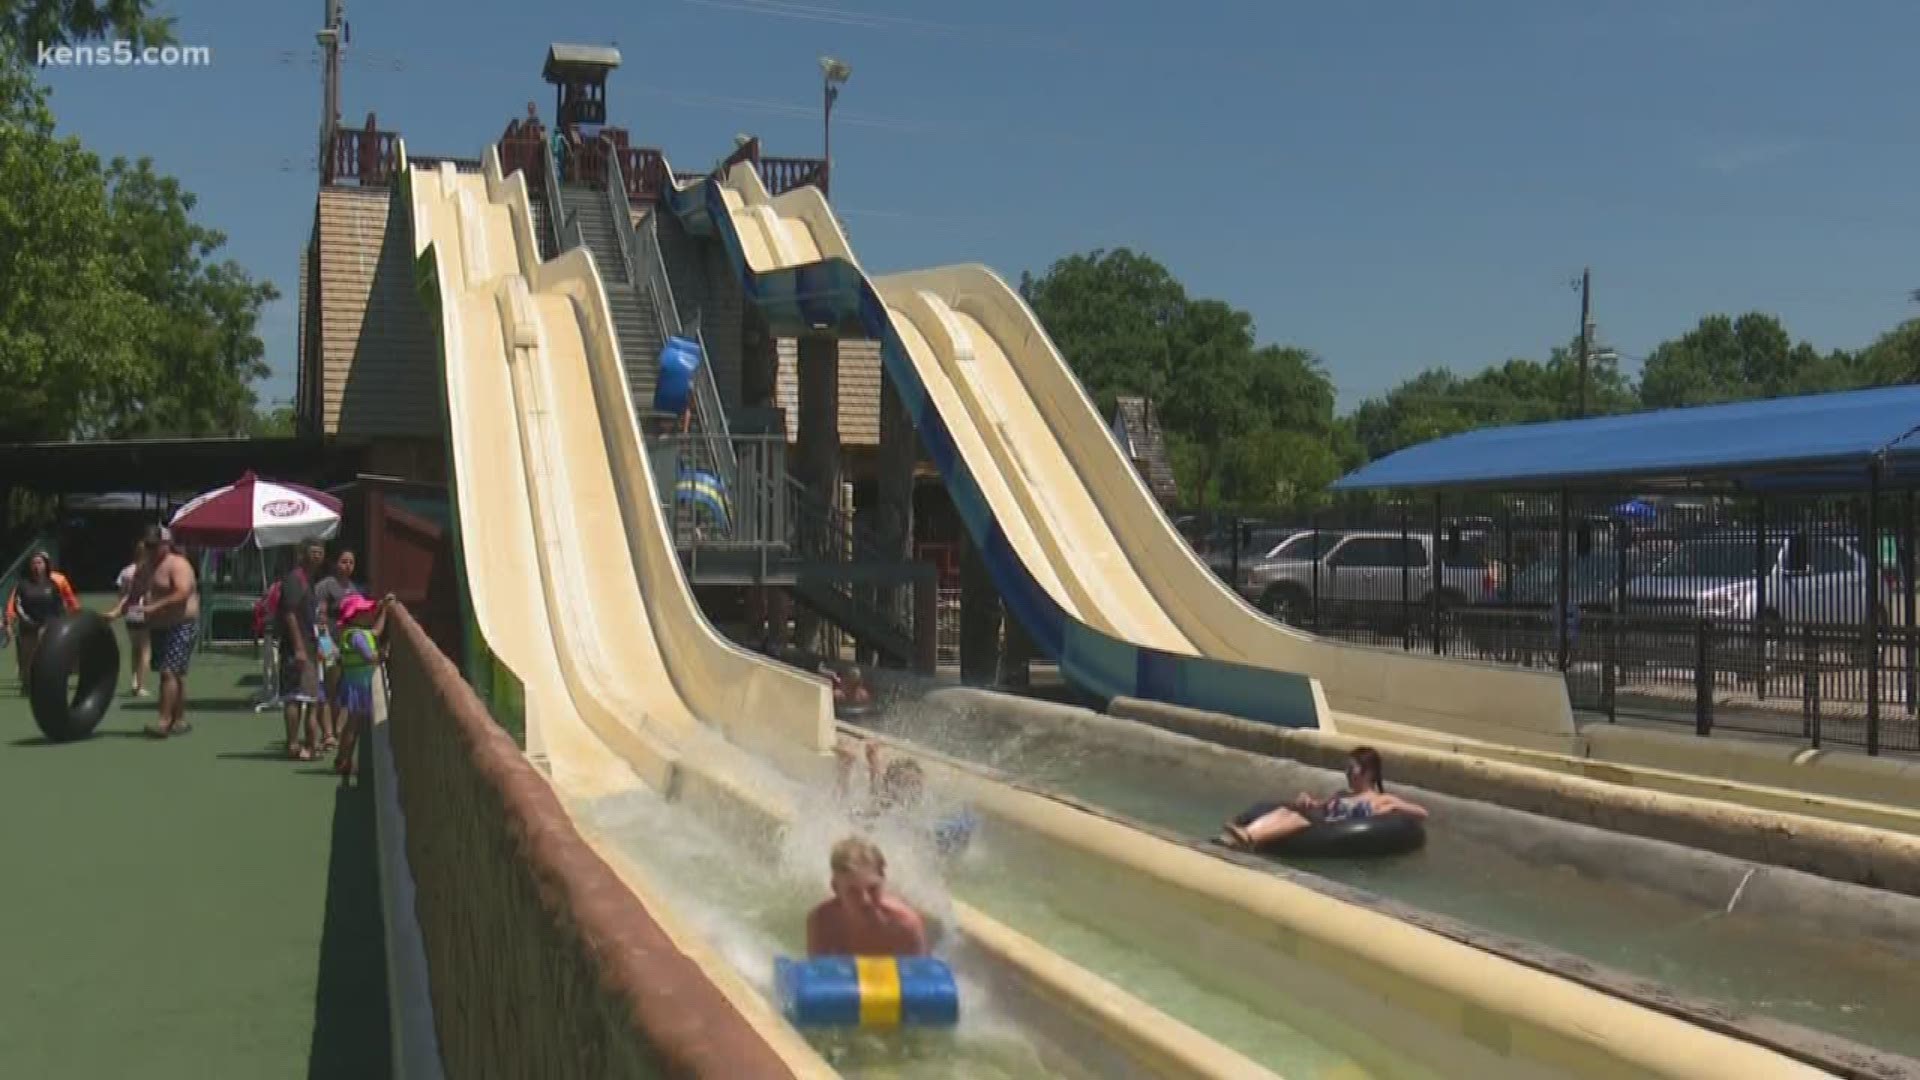 The world's best waterpark, Schlitterbahn, is celebrating 40 years of cool rides and great memories in New Braunfels.